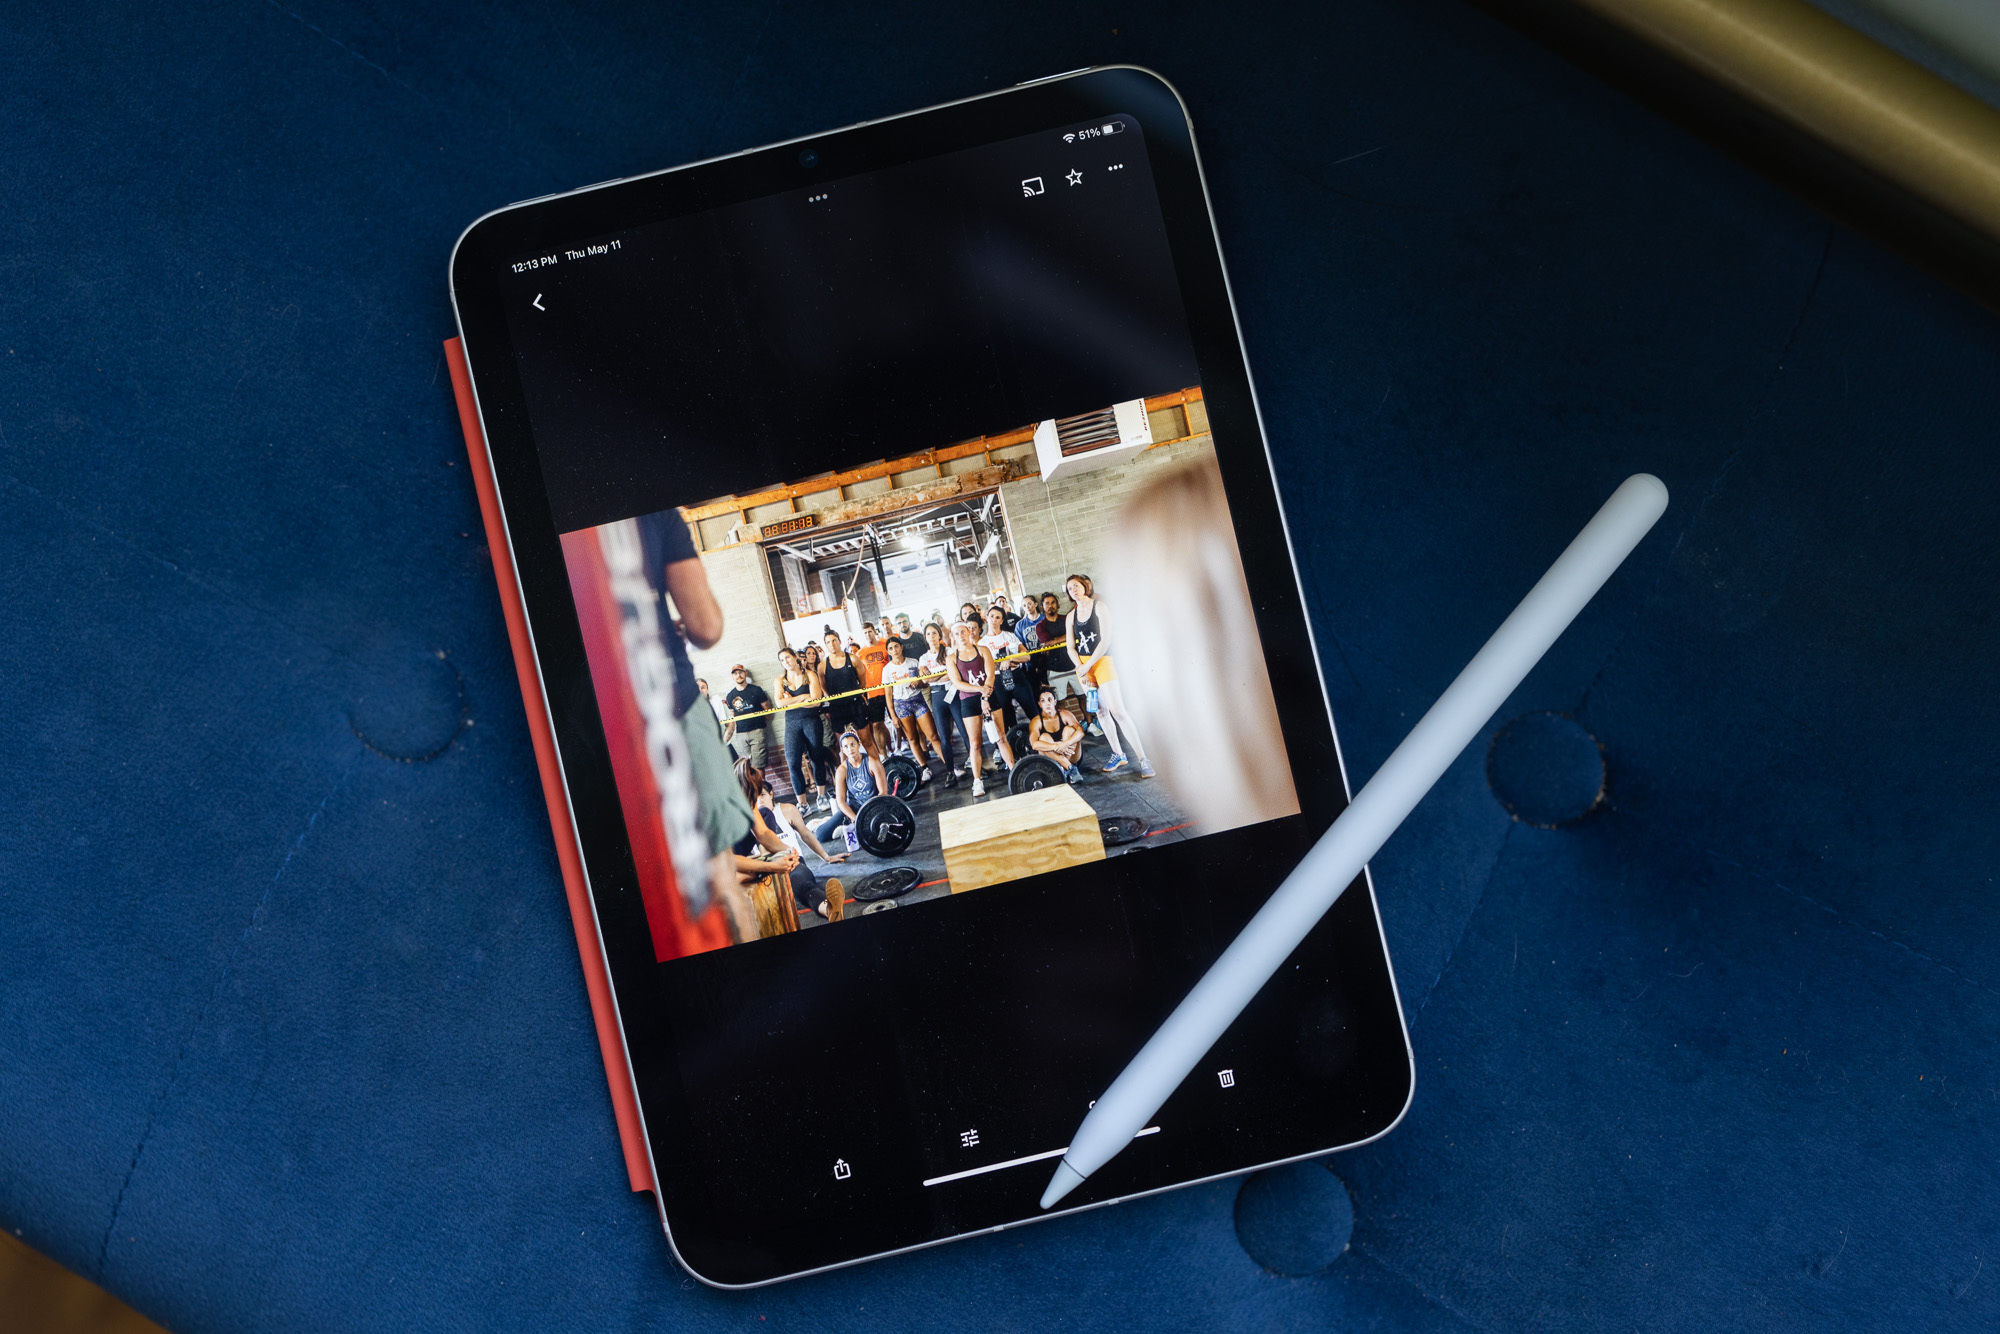 iPad mini with Apple Pencil for best overall 8-inch tablet